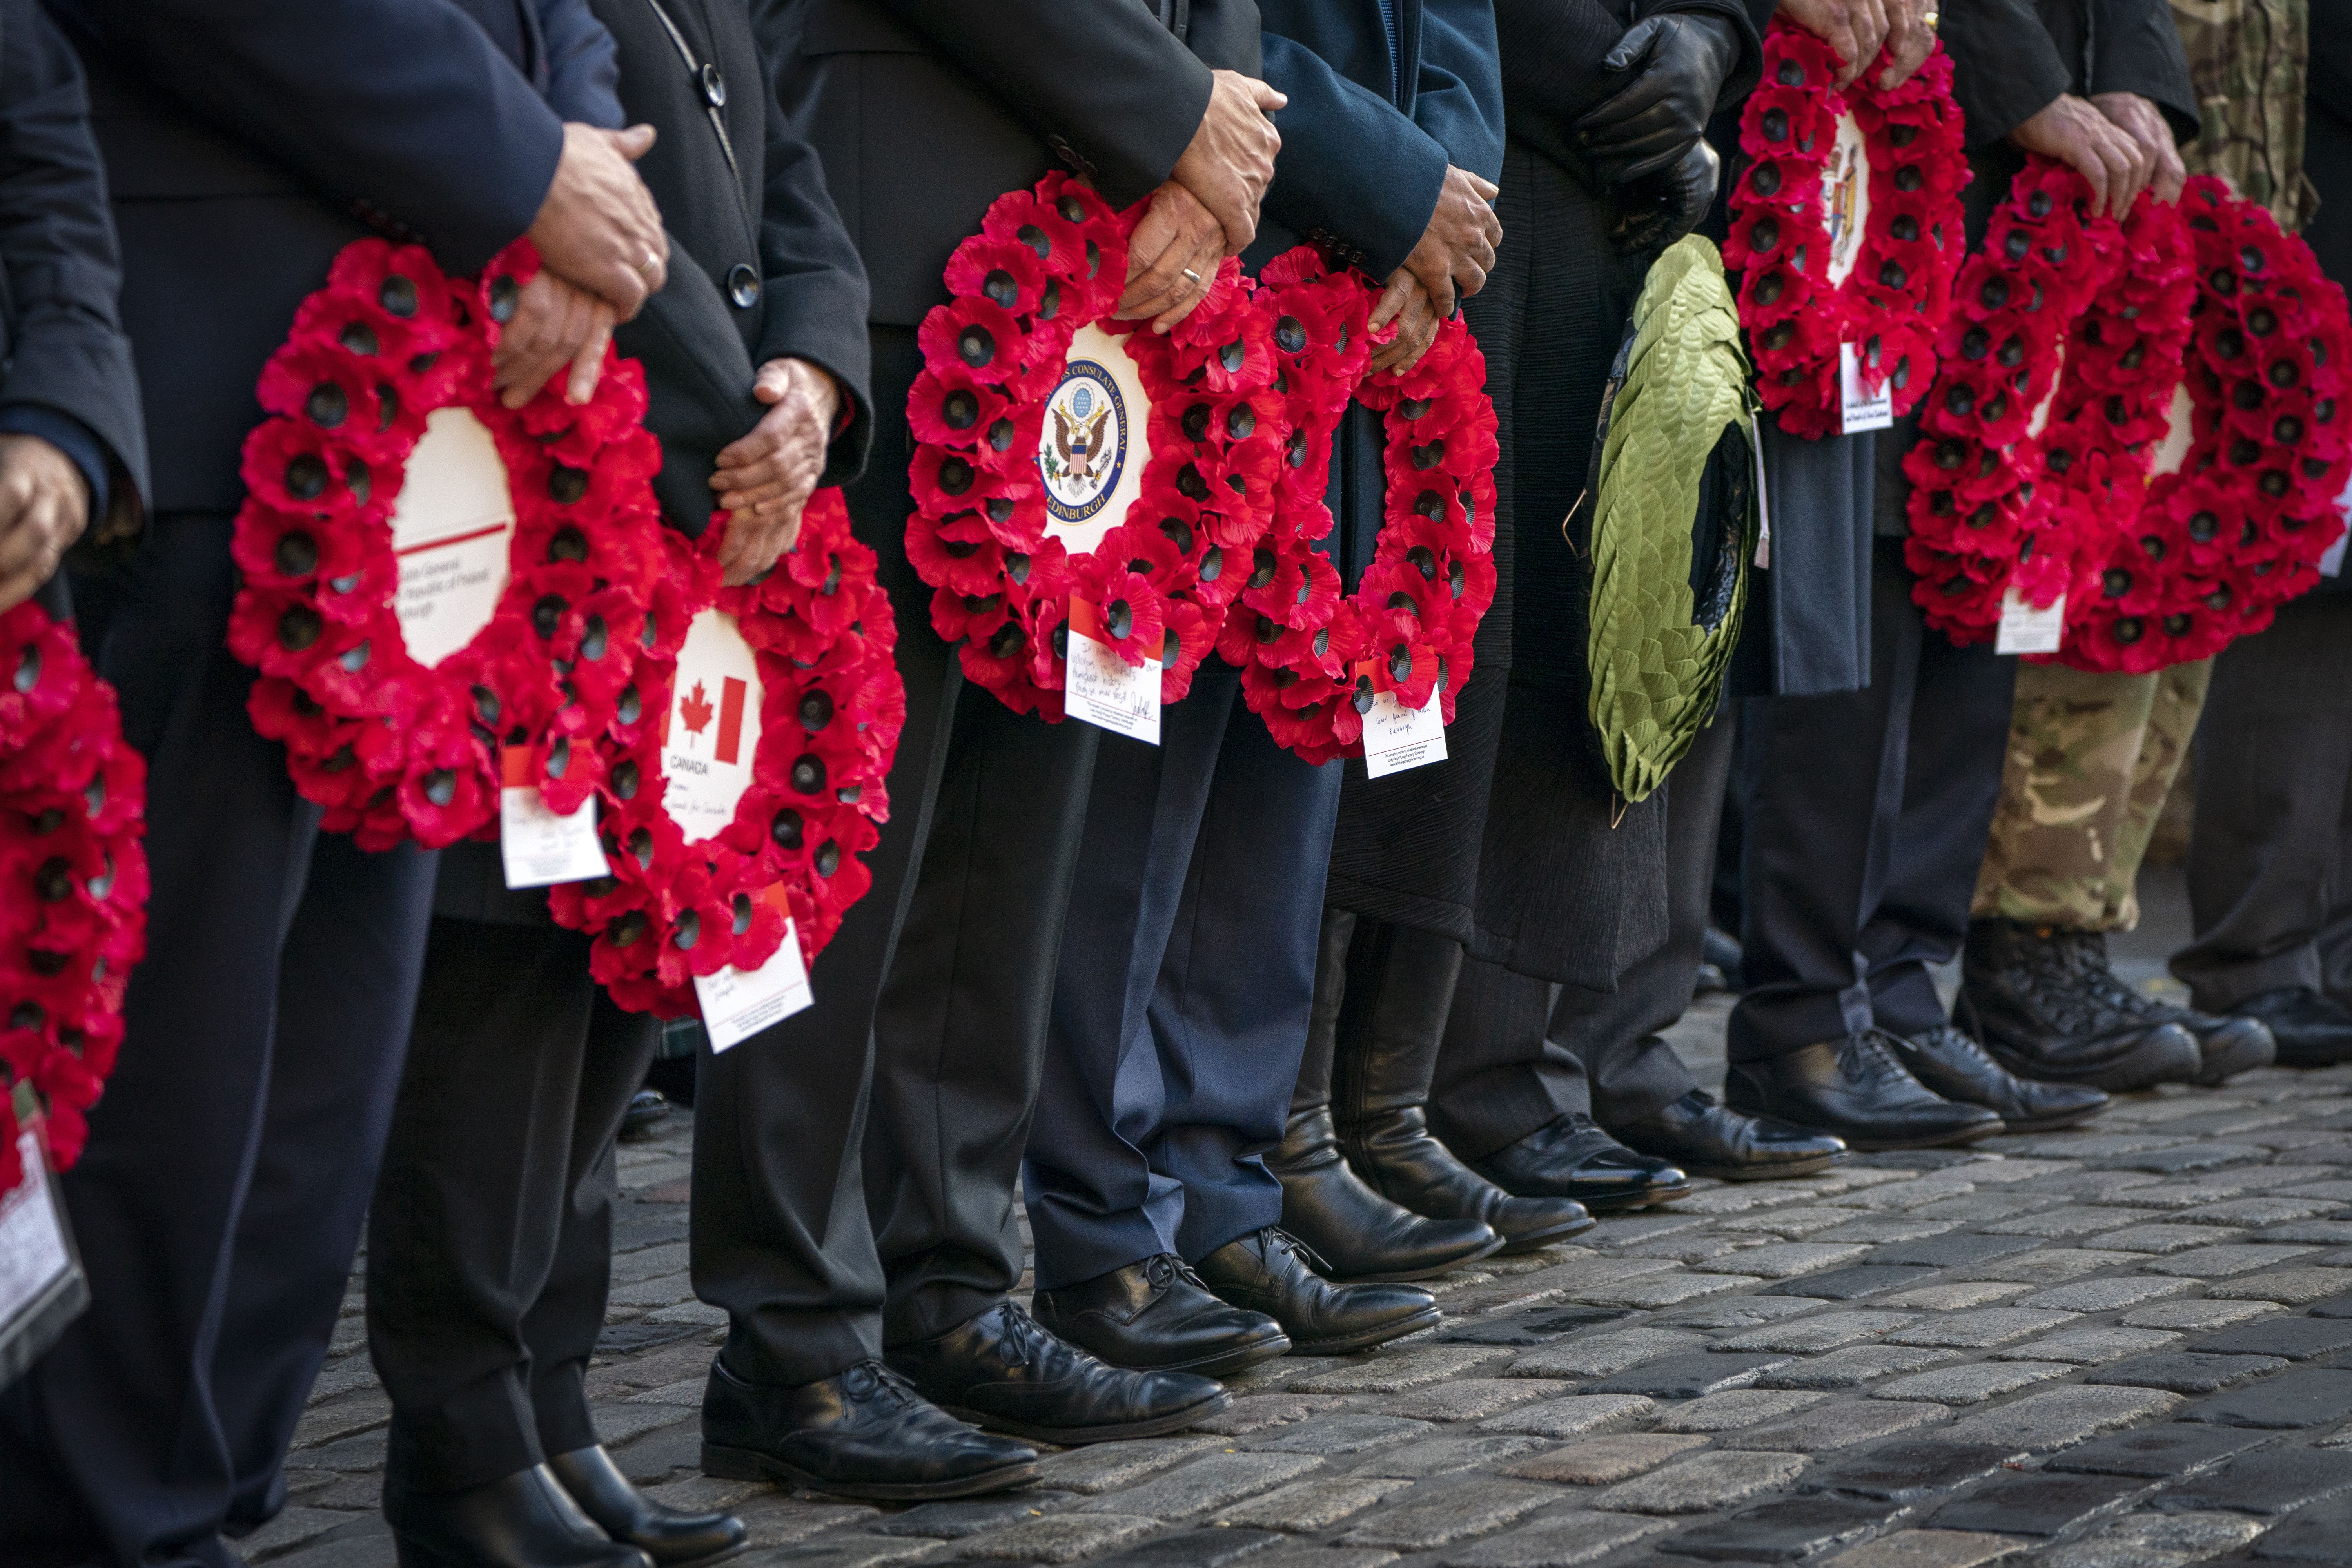 Dignitaries and members of the Armed Forces placed poppy wreaths at the Stone of Remembrance in Edinburgh (Jane Barlow/PA)